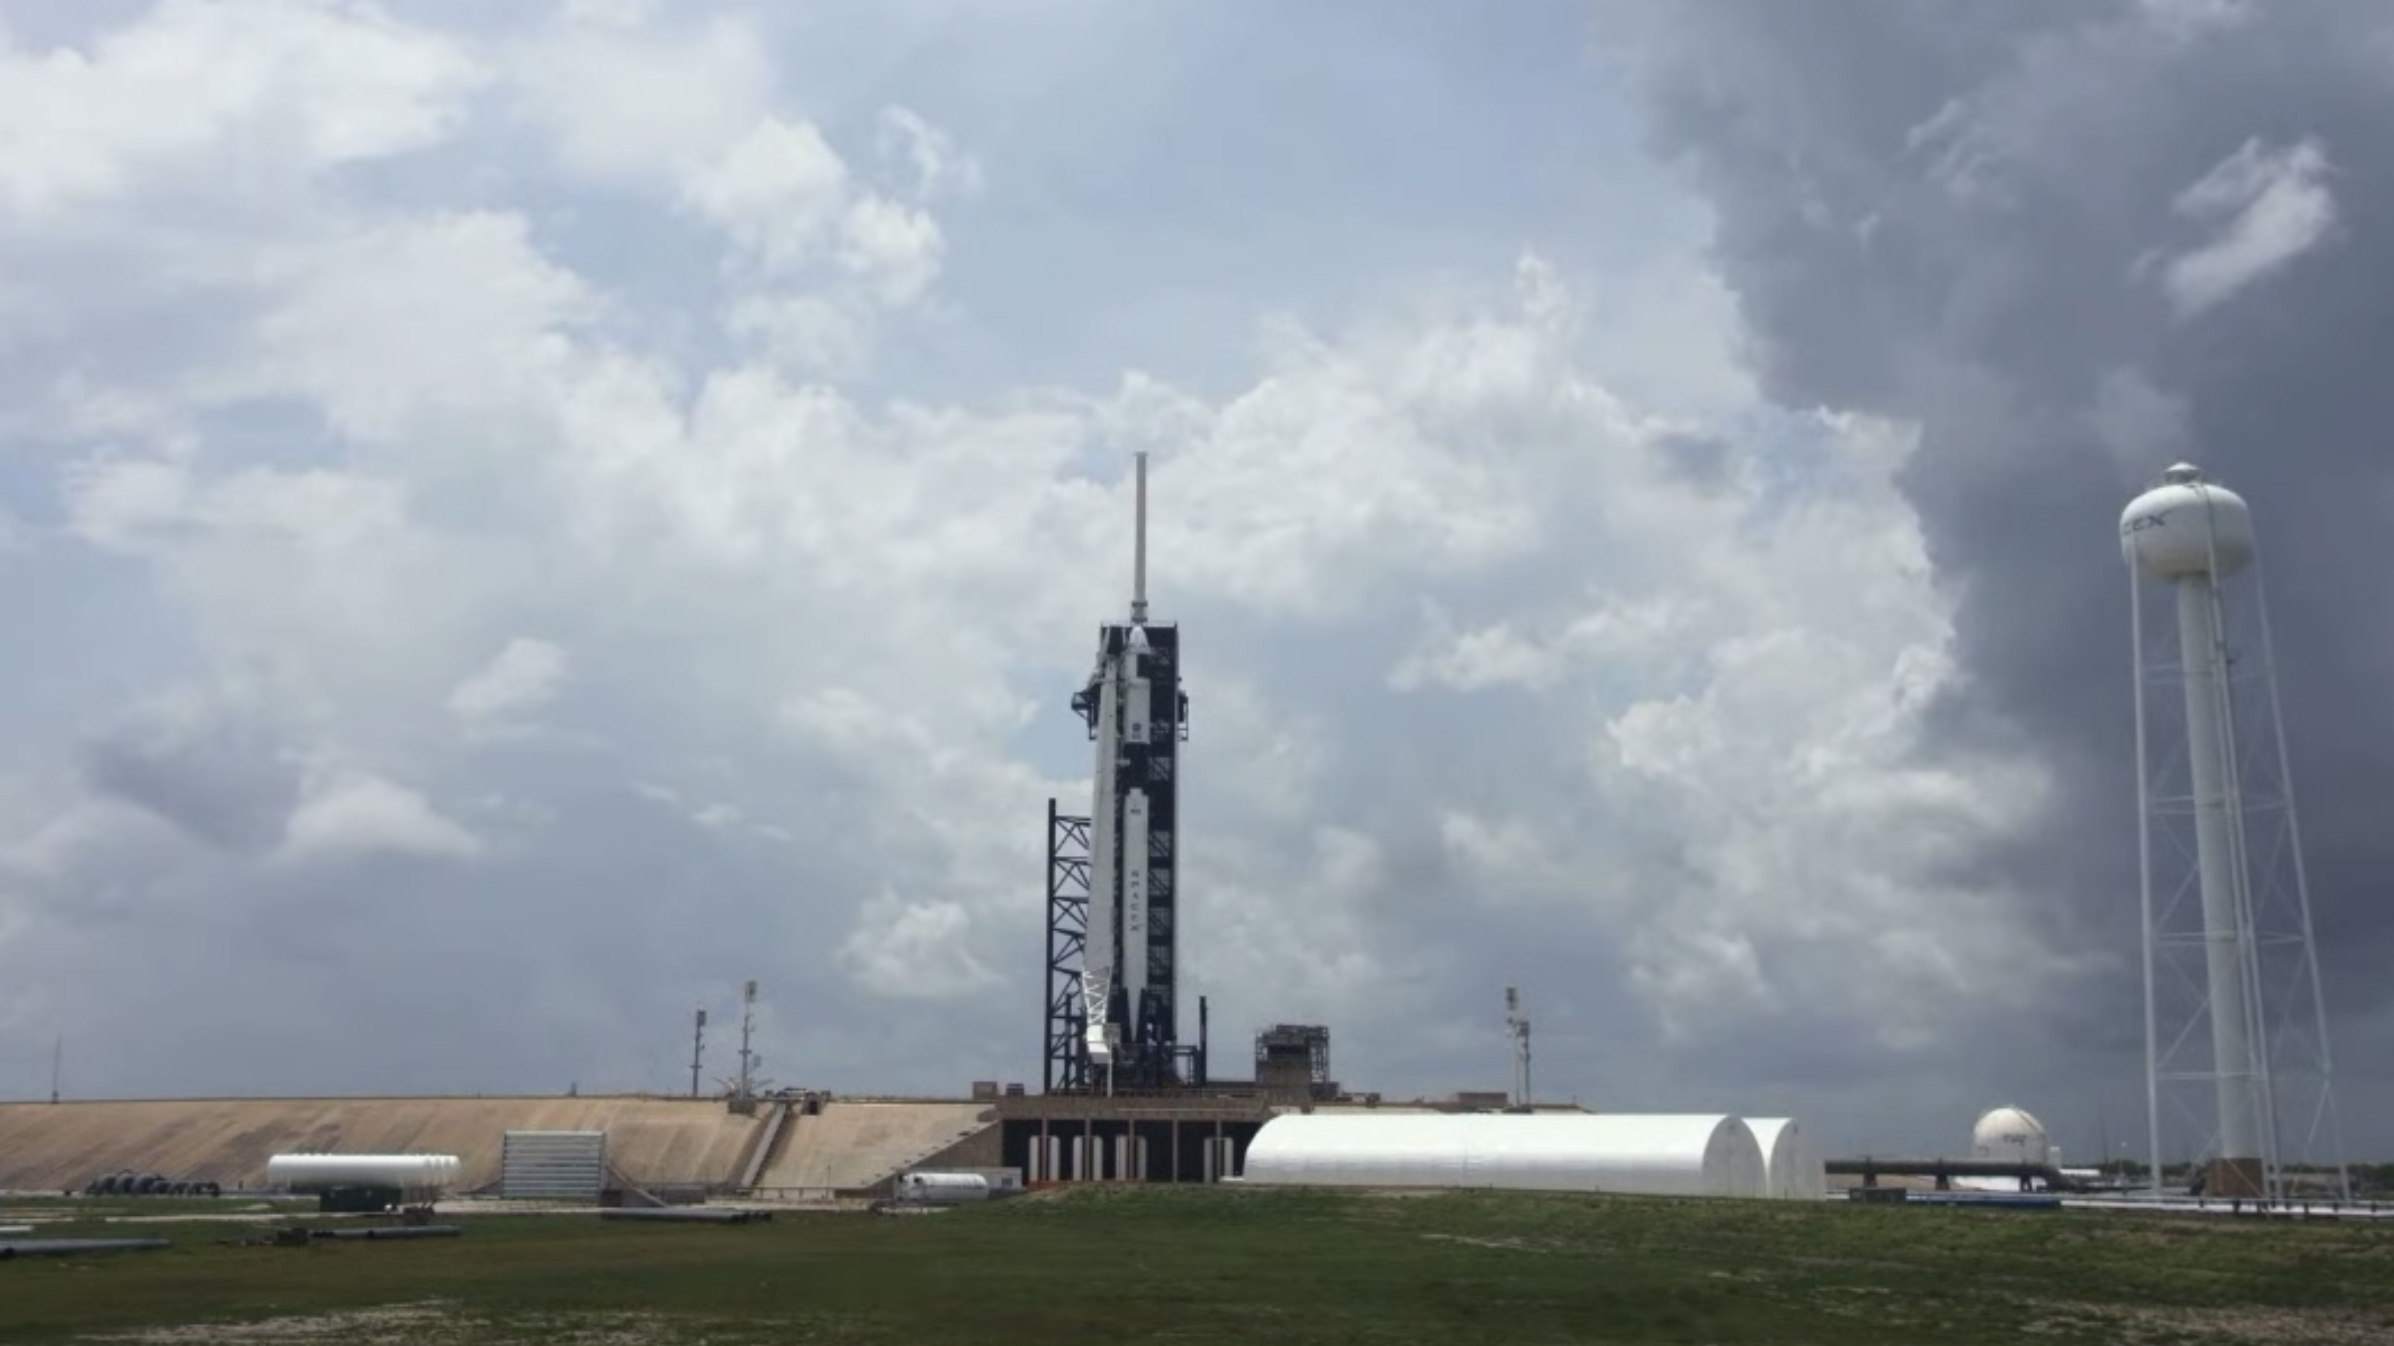 SpaceX launch live stream, liftoff video replay, and what's happening